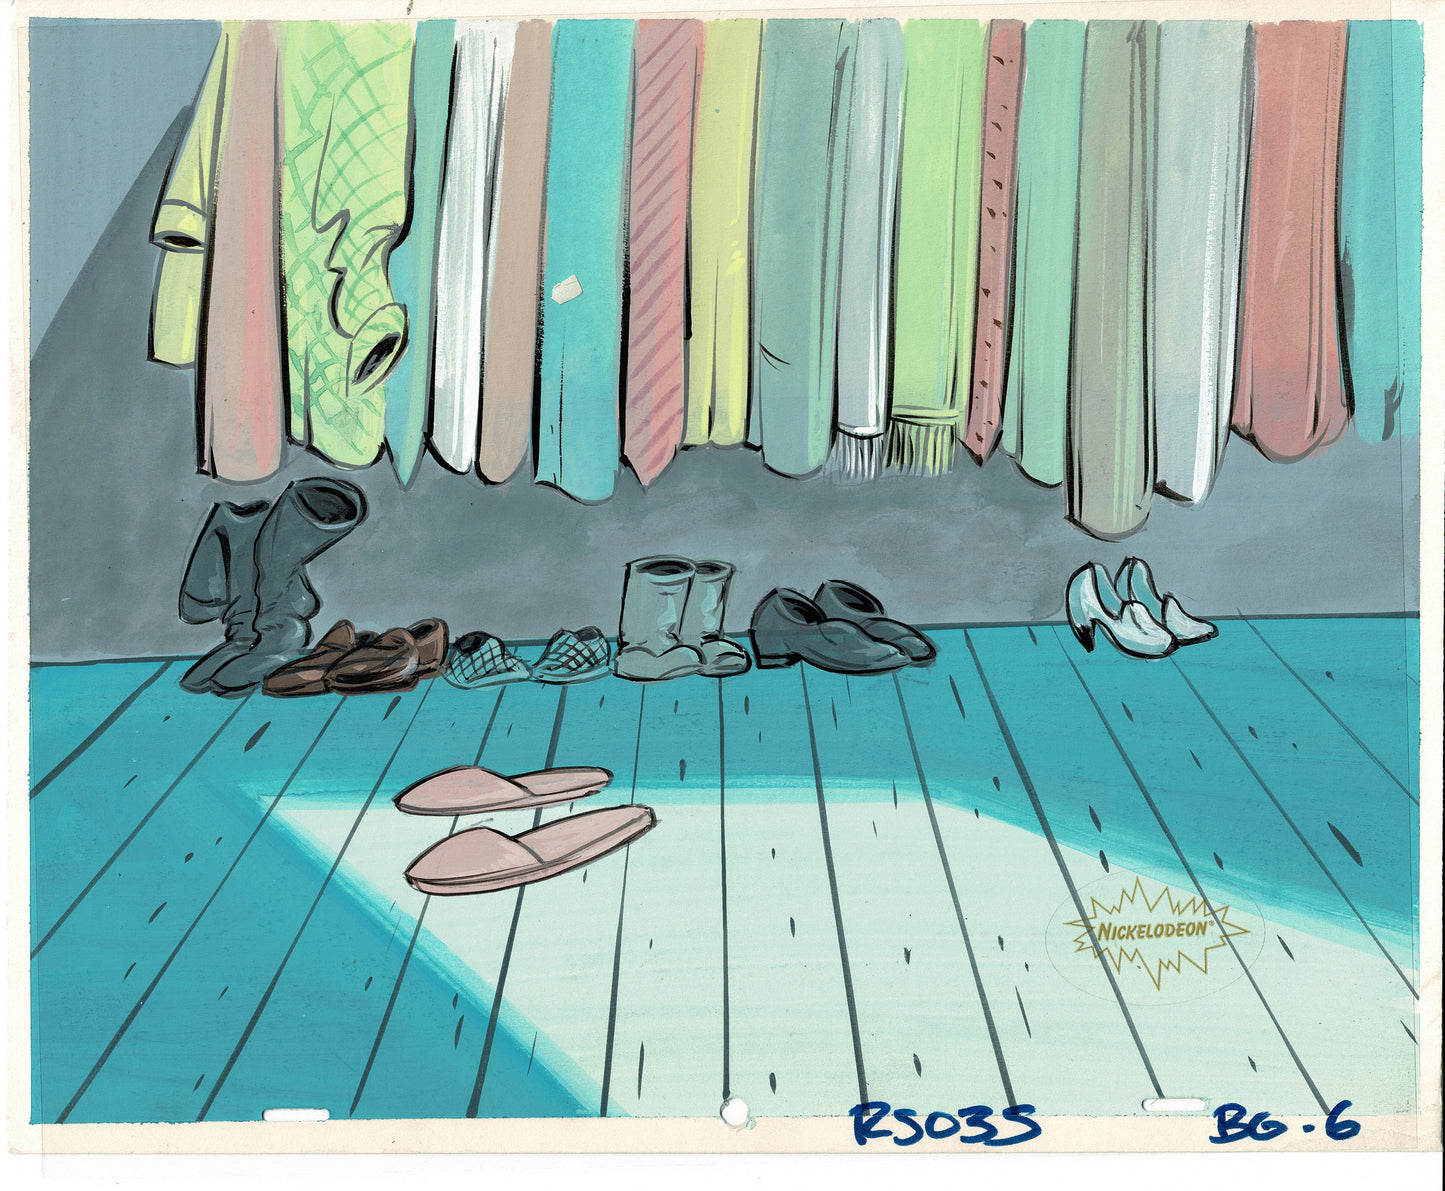 Ren and Stimpy Production Animation Background Nickelodeon 1991 Yak Shaving Day